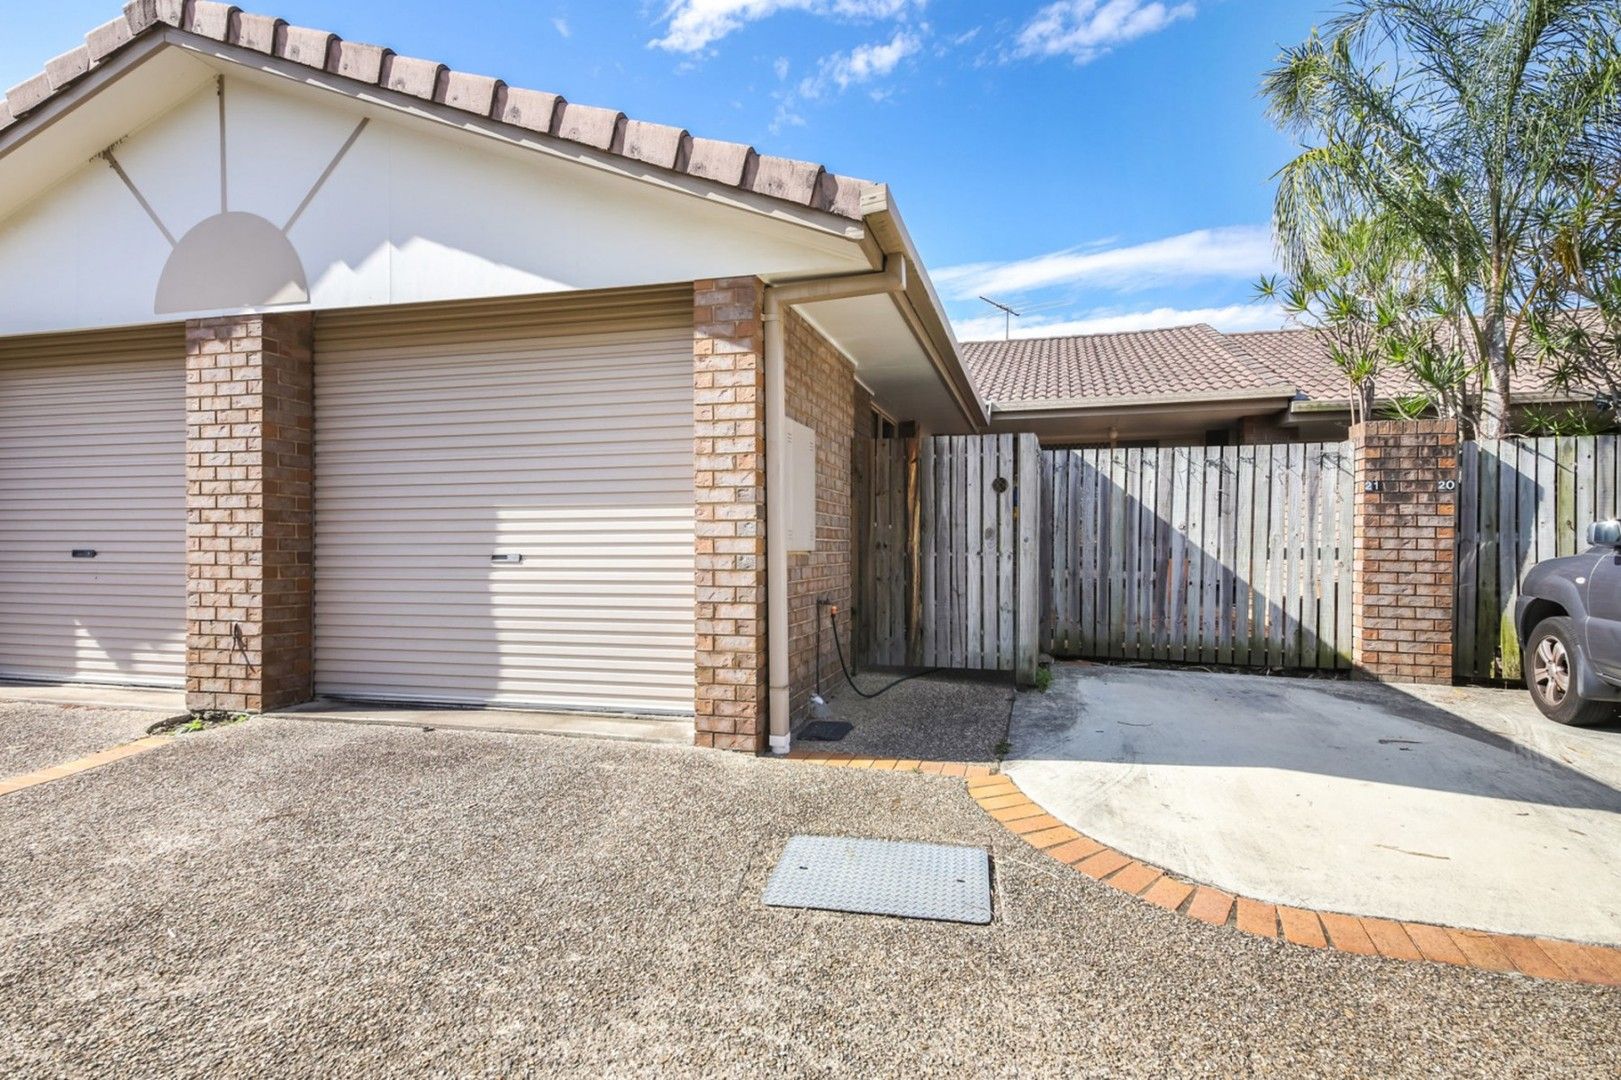 2 bedrooms Townhouse in 21/5 IMBER ST CHERMSIDE QLD, 4032